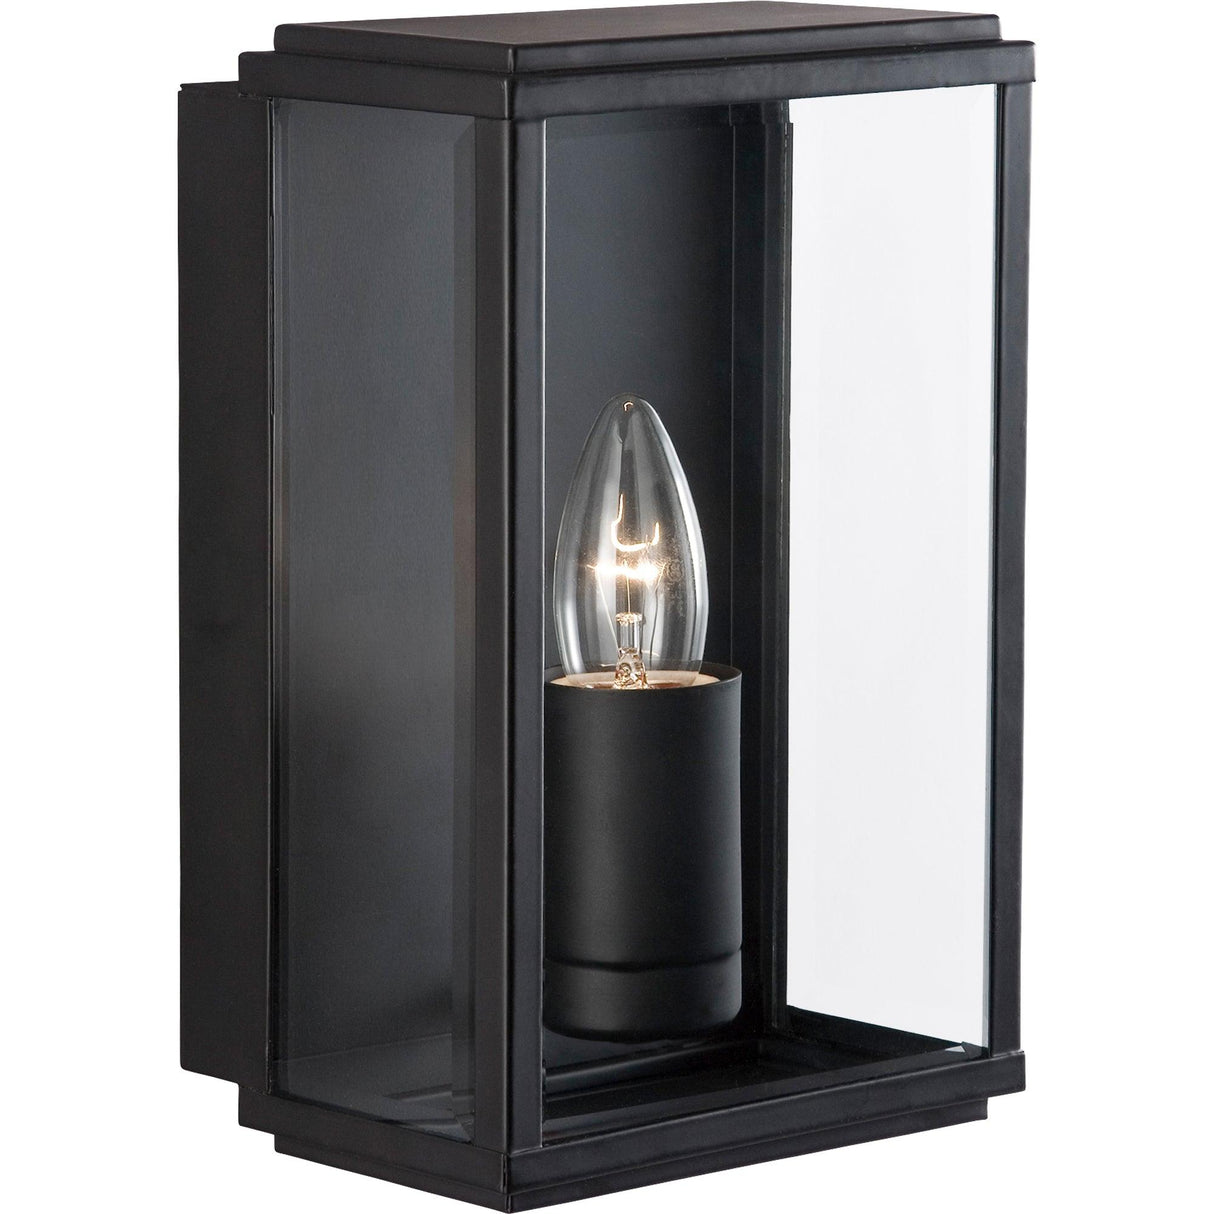 Searchlight - 8204BK - Searchlight Box Outdoor Wall Light - Black Metal & Glass Search Light Part Number 8204BK